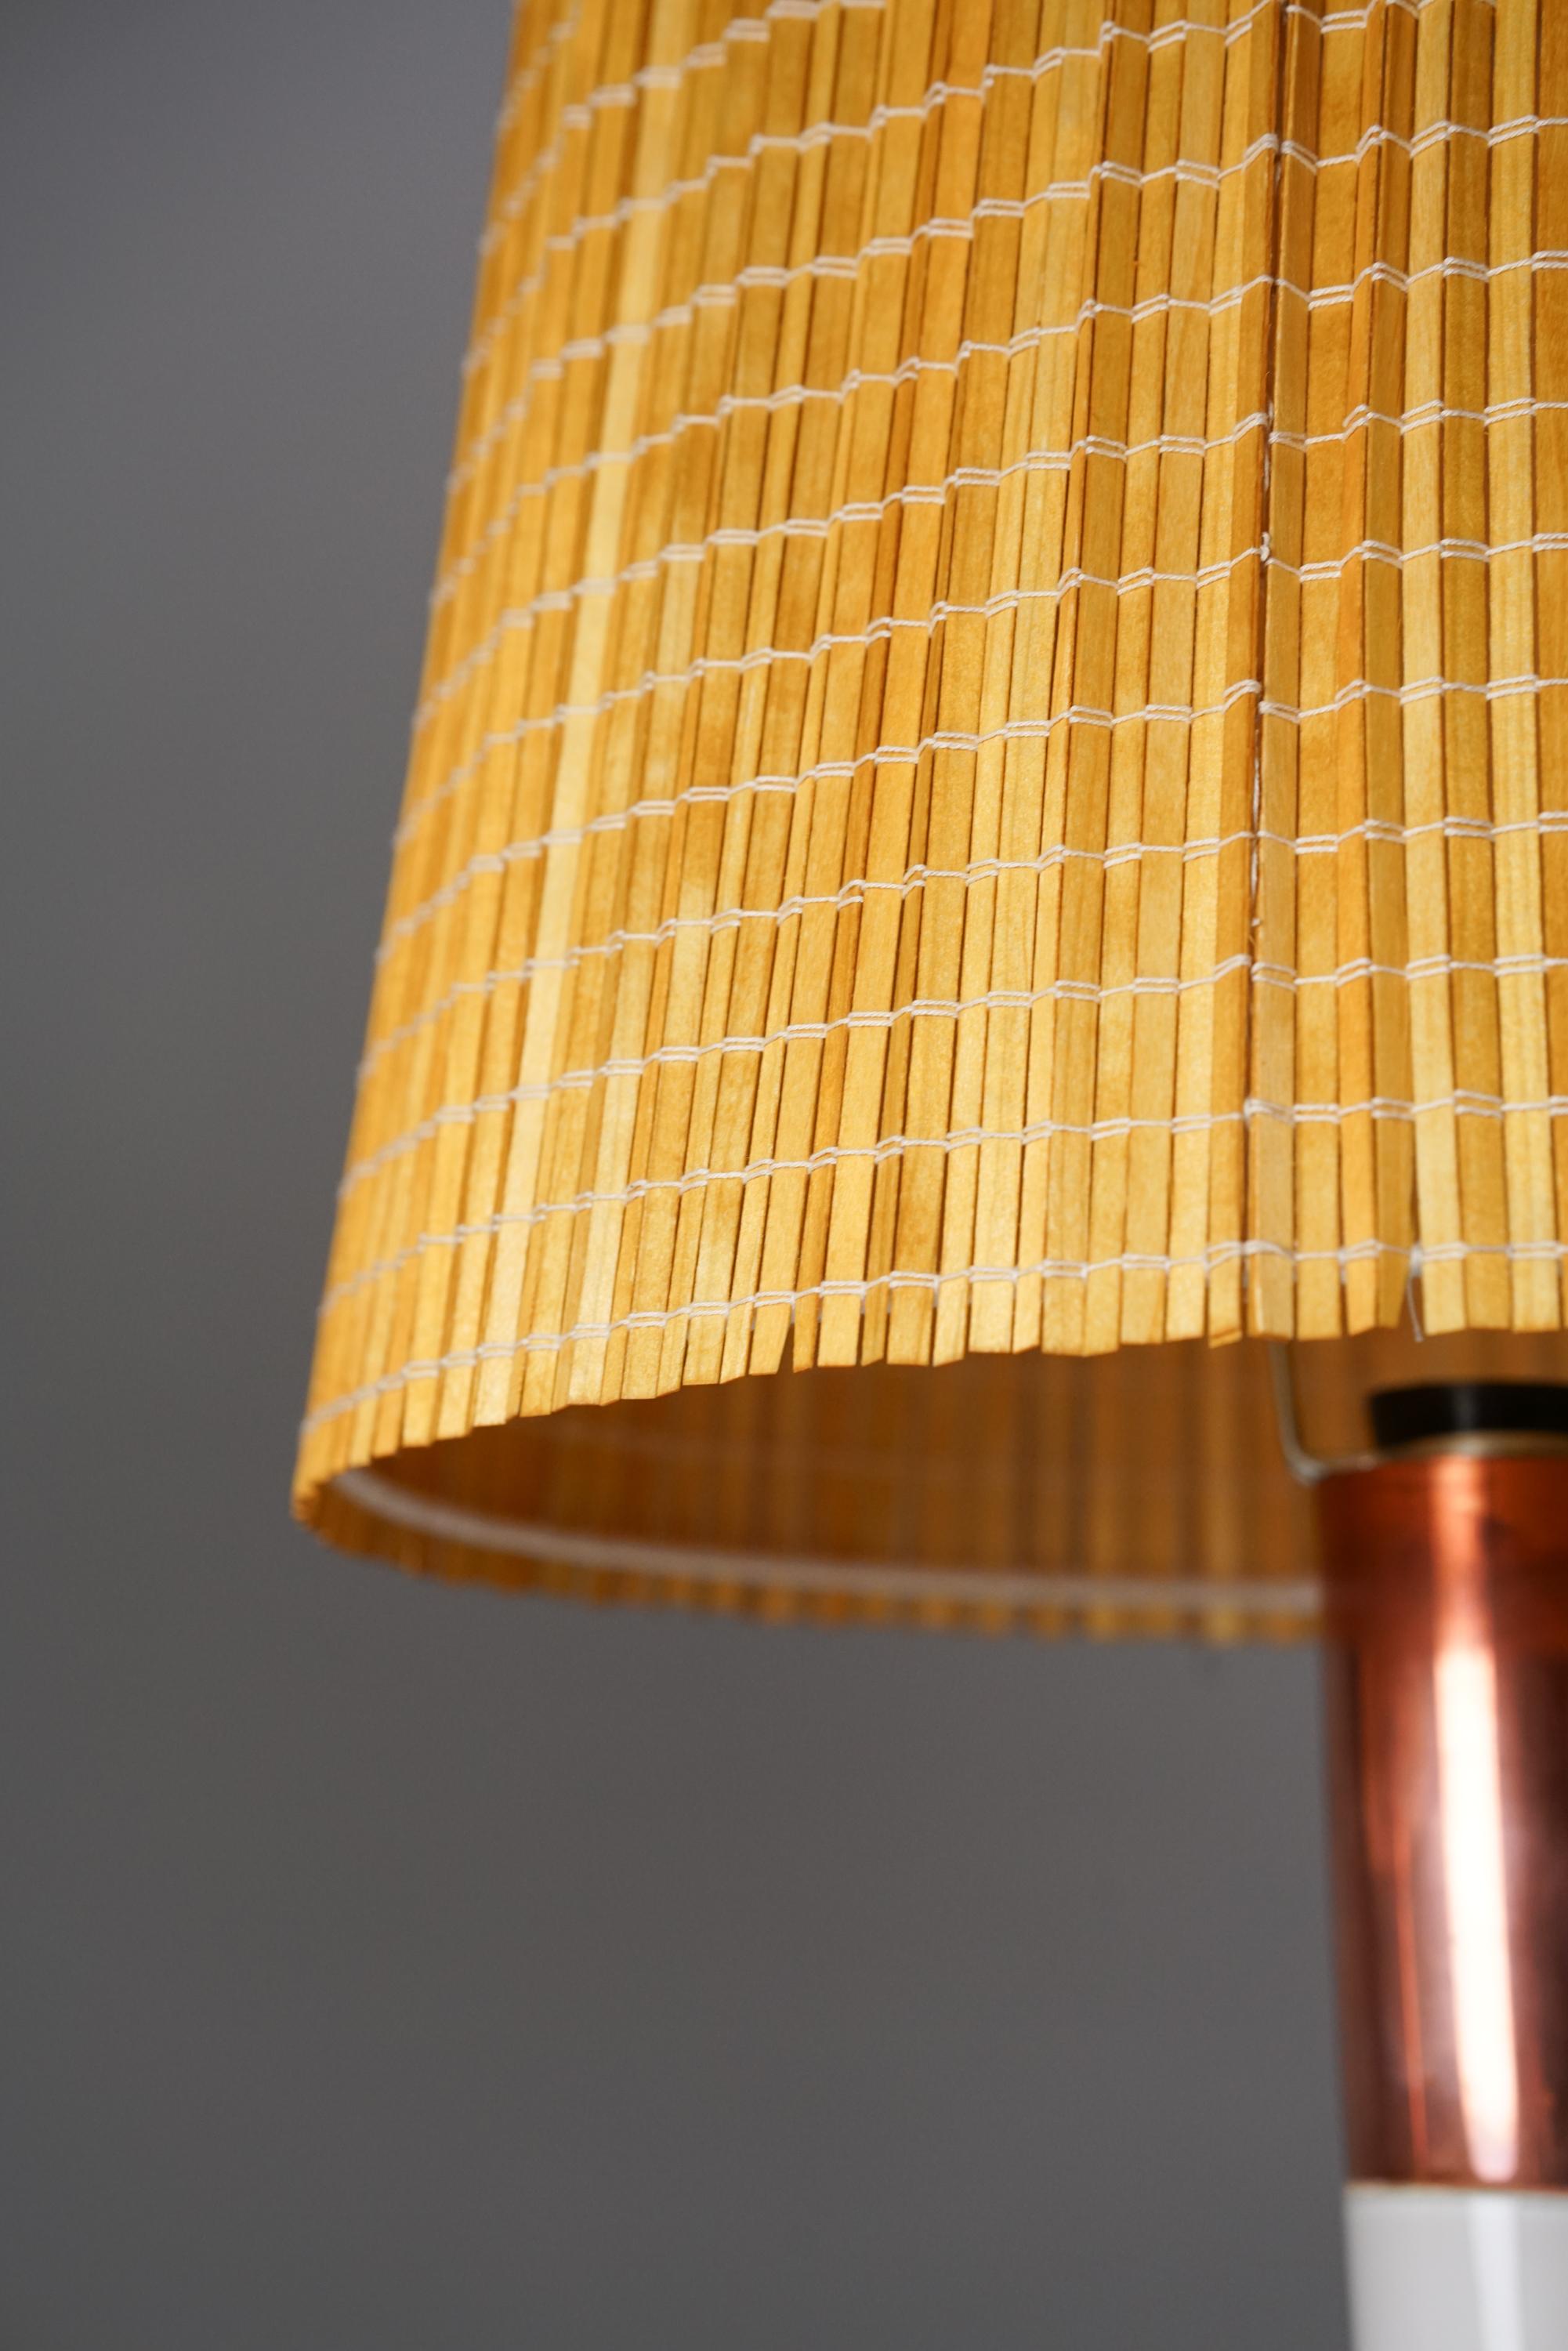 Copper Pair of Lisa Johansson-Pape Glass Lamps With Wooden Slat Shades, Orno Oy, 1960s For Sale